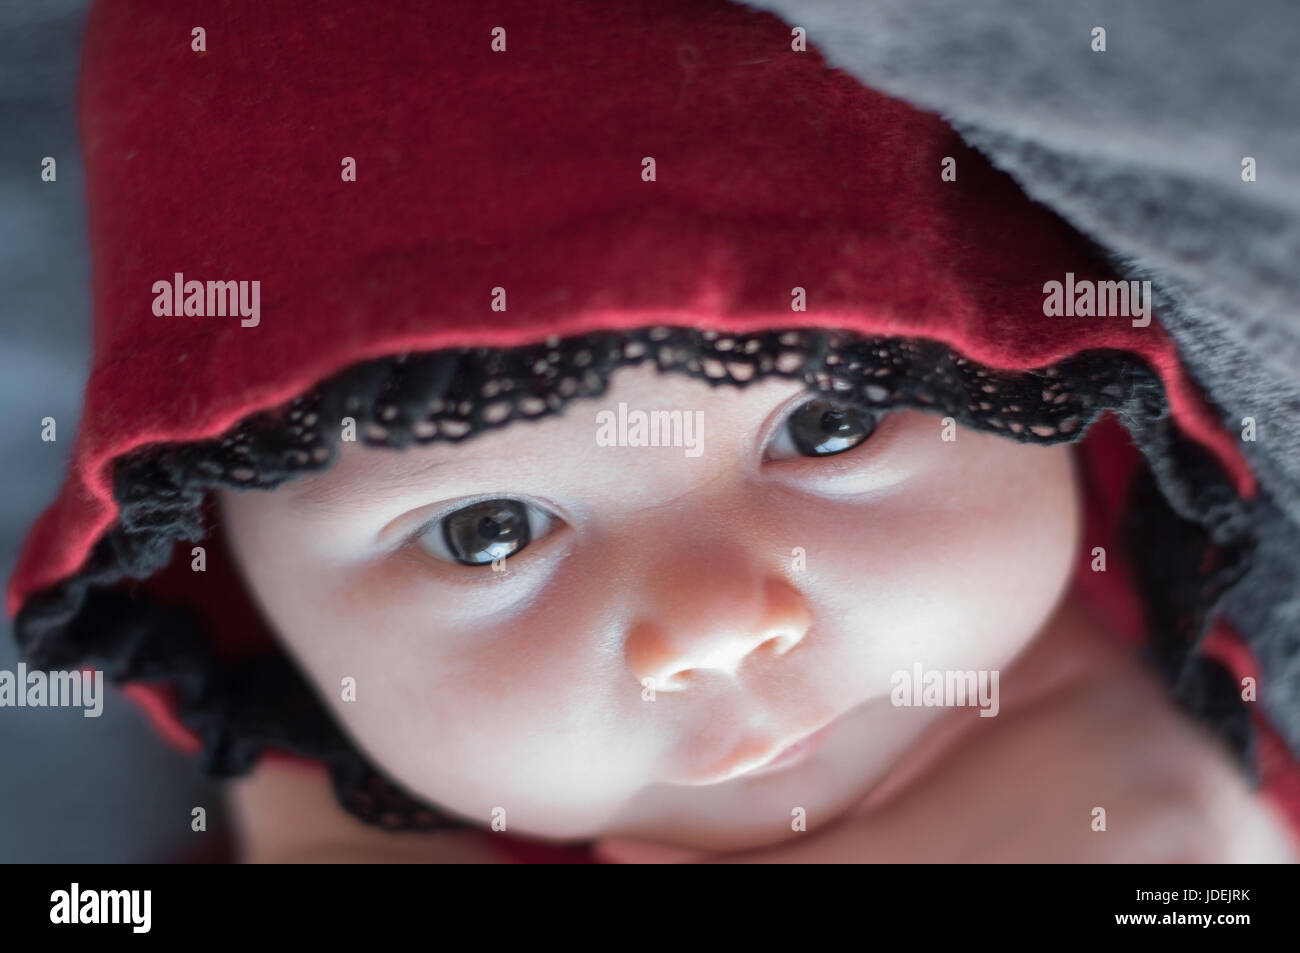 Baby face close up, with big beautiful eyes. Newborn in a red cap. Toddler looking through lace, directly into the lens. Stock Photo